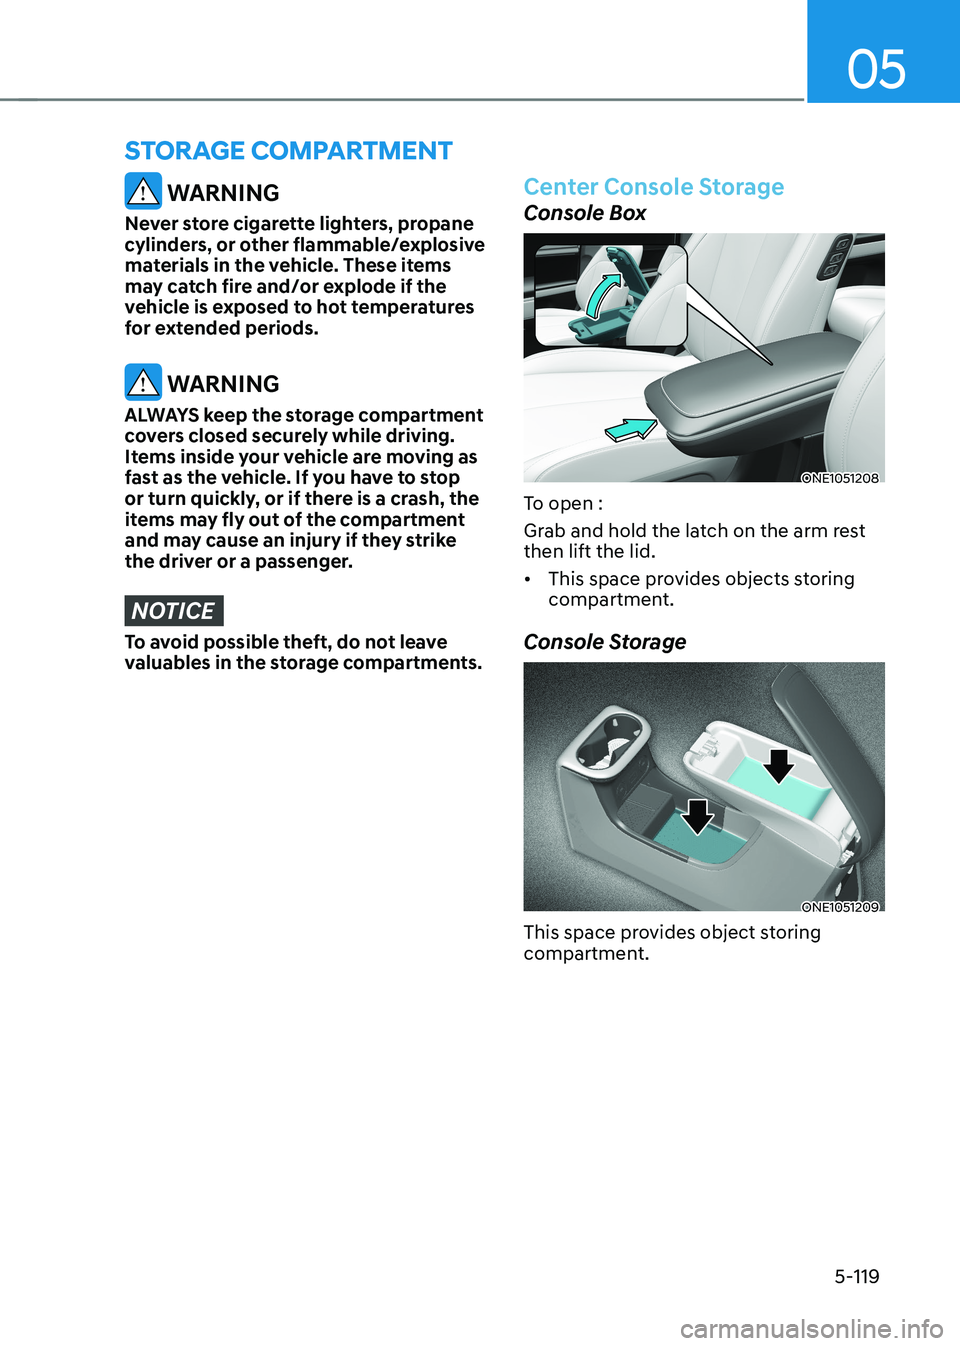 HYUNDAI IONIQ 5 2023  Owners Manual 05
5-119
 WARNING
Never store cigarette lighters, propane  
cylinders, or other flammable/explosive 
materials in the vehicle. These items 
may catch fire and/or explode if the 
vehicle is exposed to 